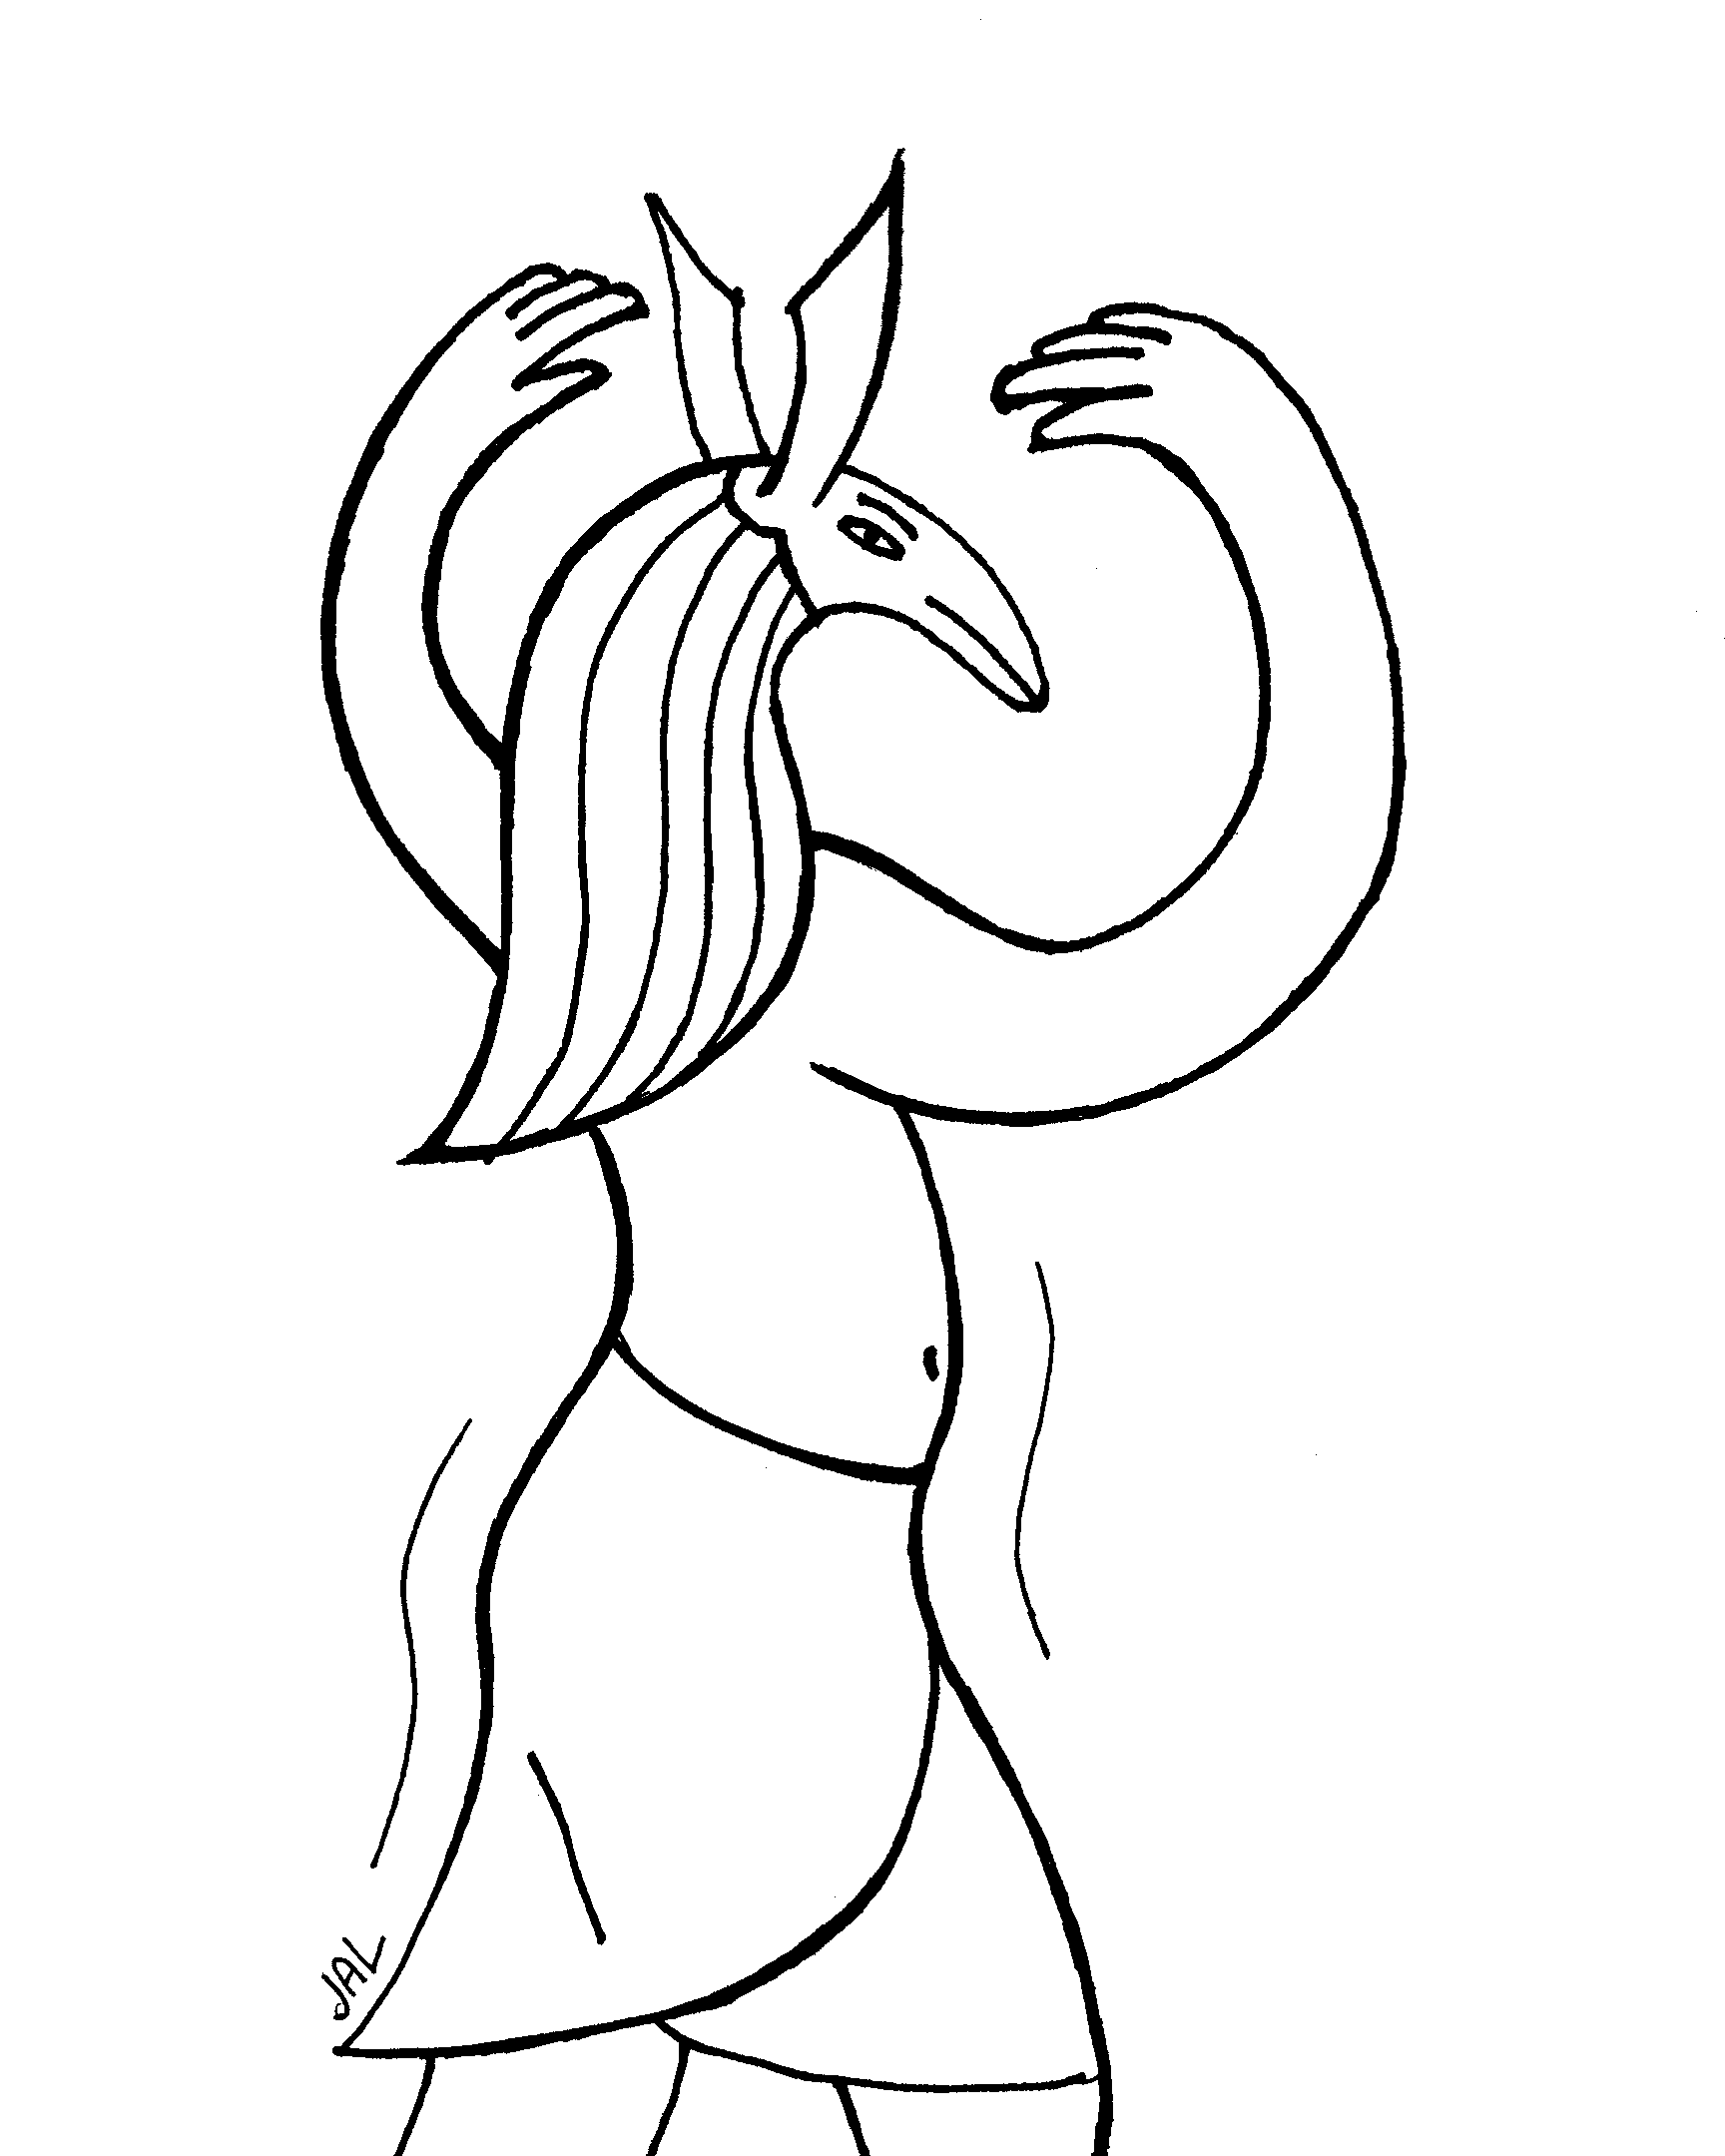 Coloring page: Egyptian Mythology (Gods and Goddesses) #111402 - Free Printable Coloring Pages